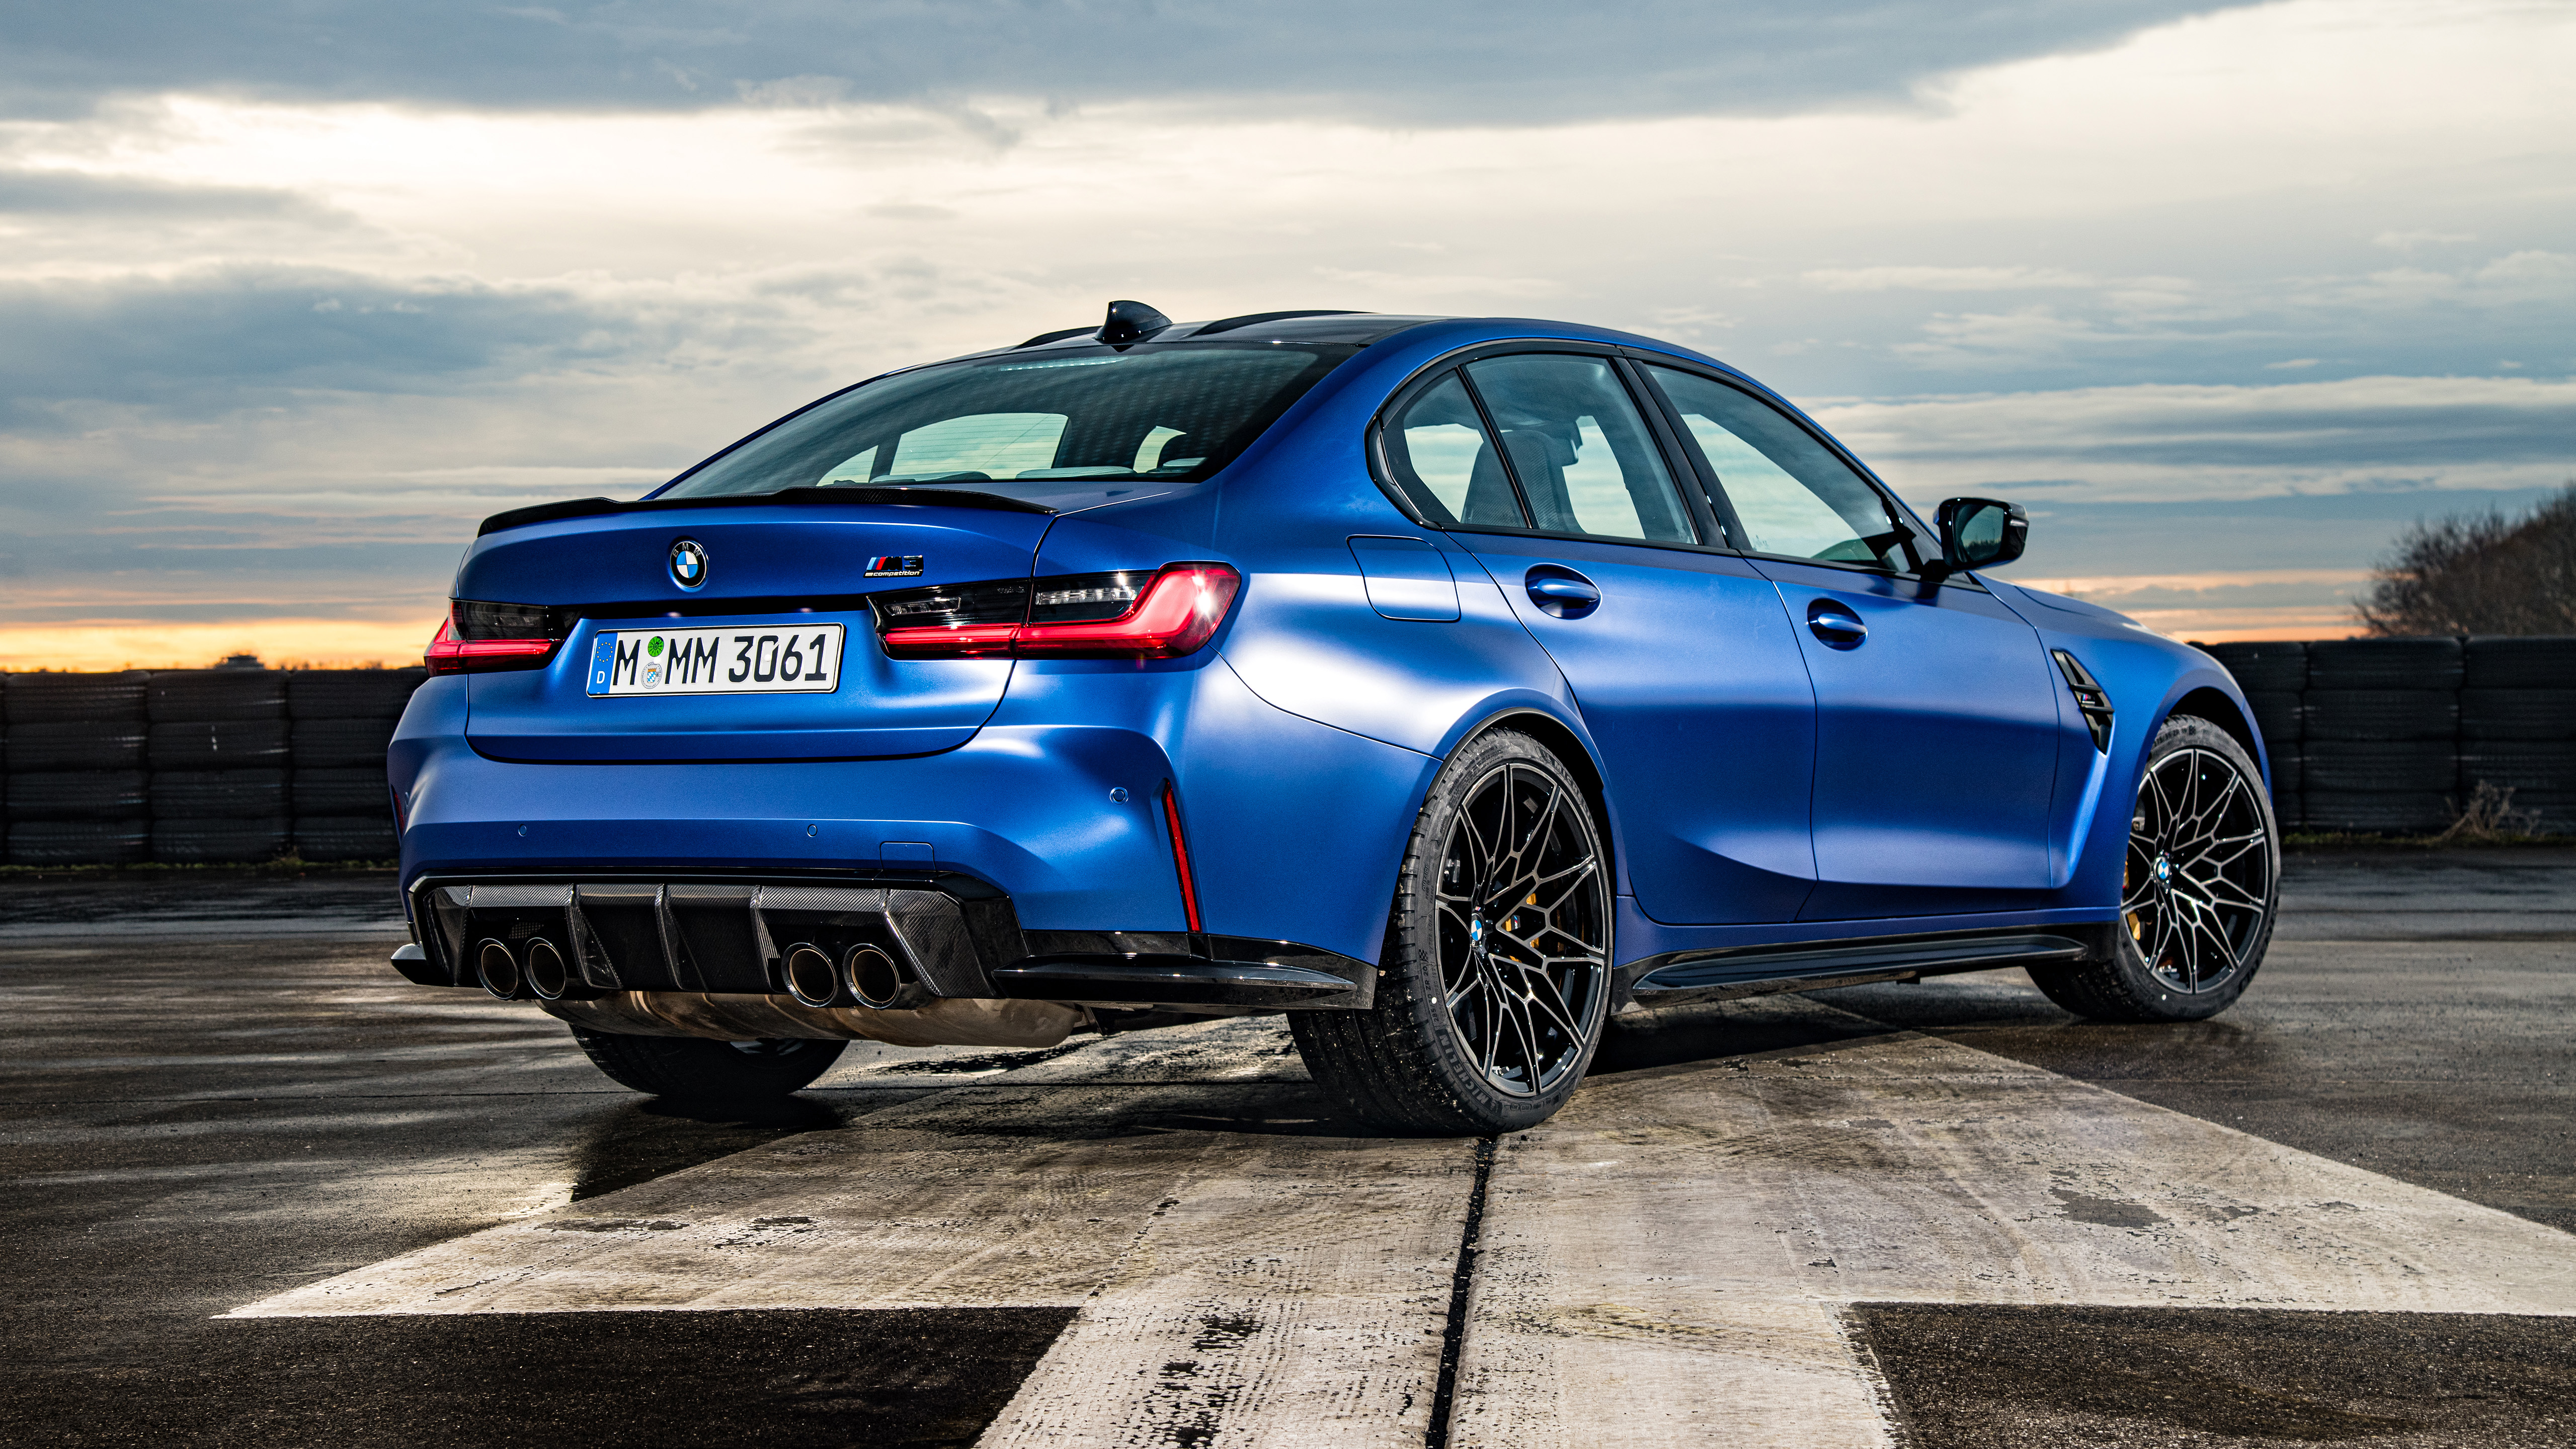 Bmw m3 competition цена. BMW m3 Competition 2021. BMW m3 g80. BMW m3 Competition а80. BMW m3 g82 Competition.